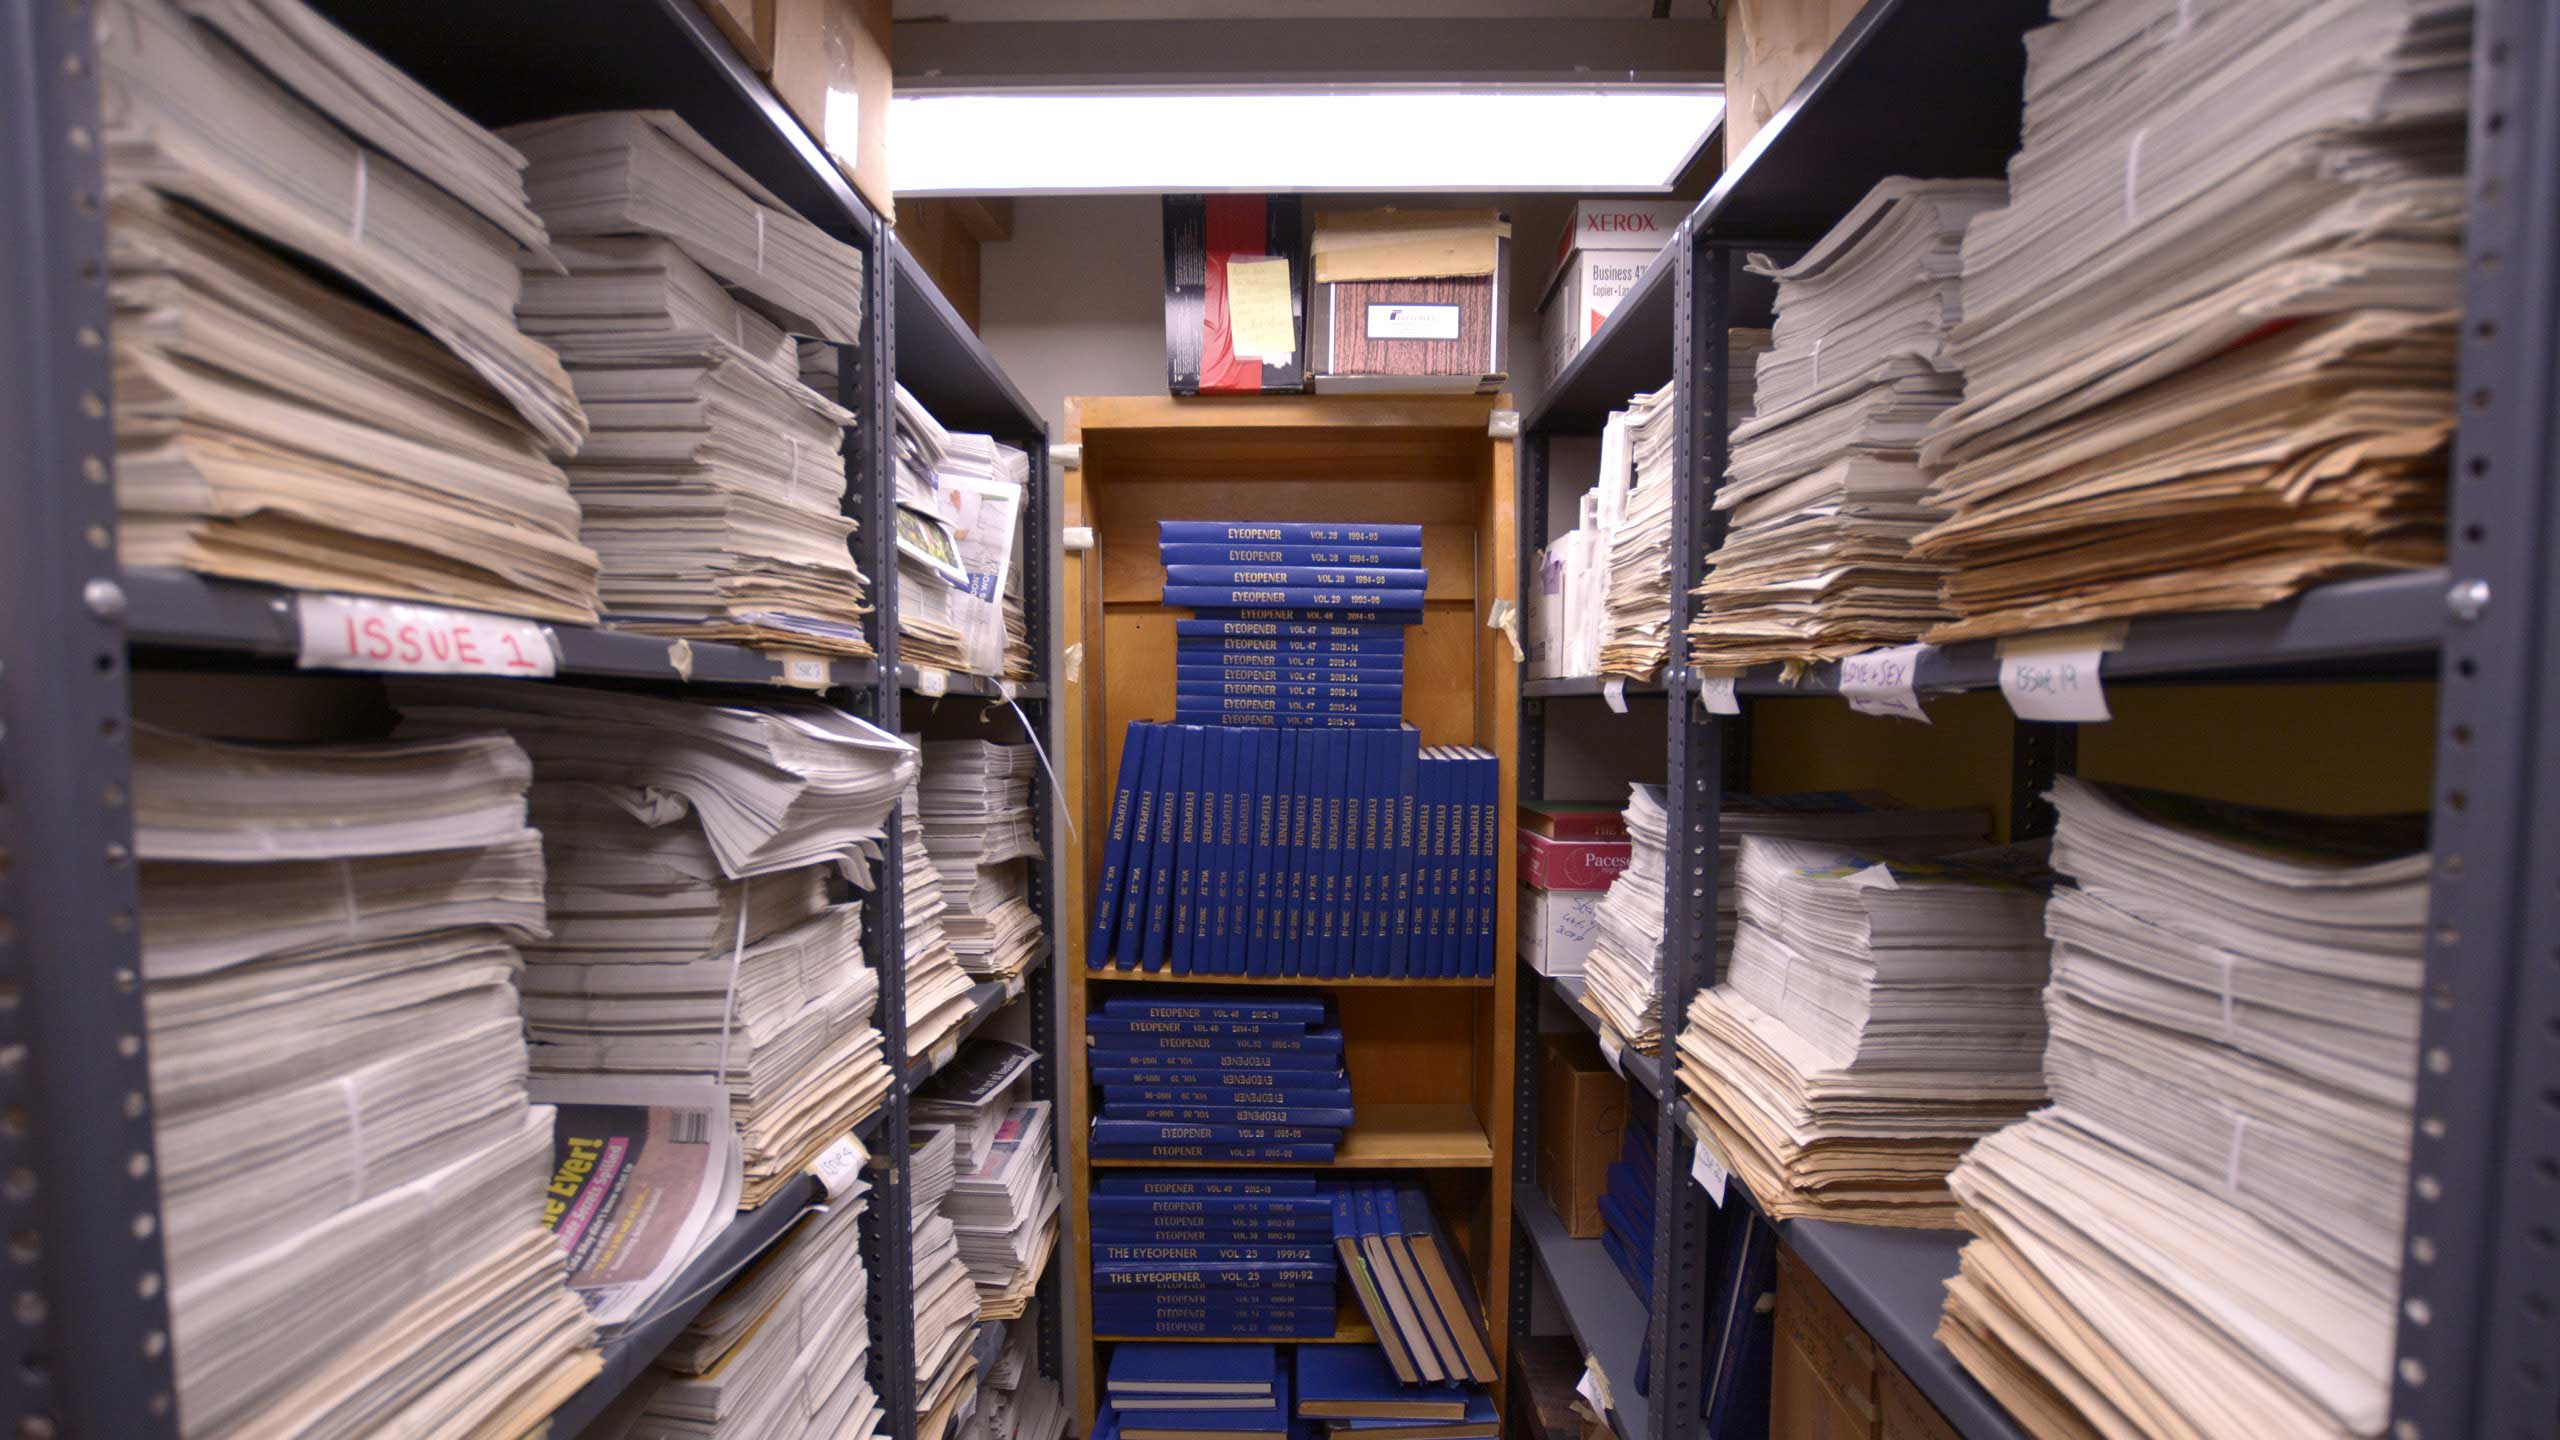 A look inside small room lined with floor to ceiling shelves, full of large stacks of newspapers. At the back of the room is a shelf with blue books labelled as "Eyeopener" with different dates. The room is poorly lit but cozy.